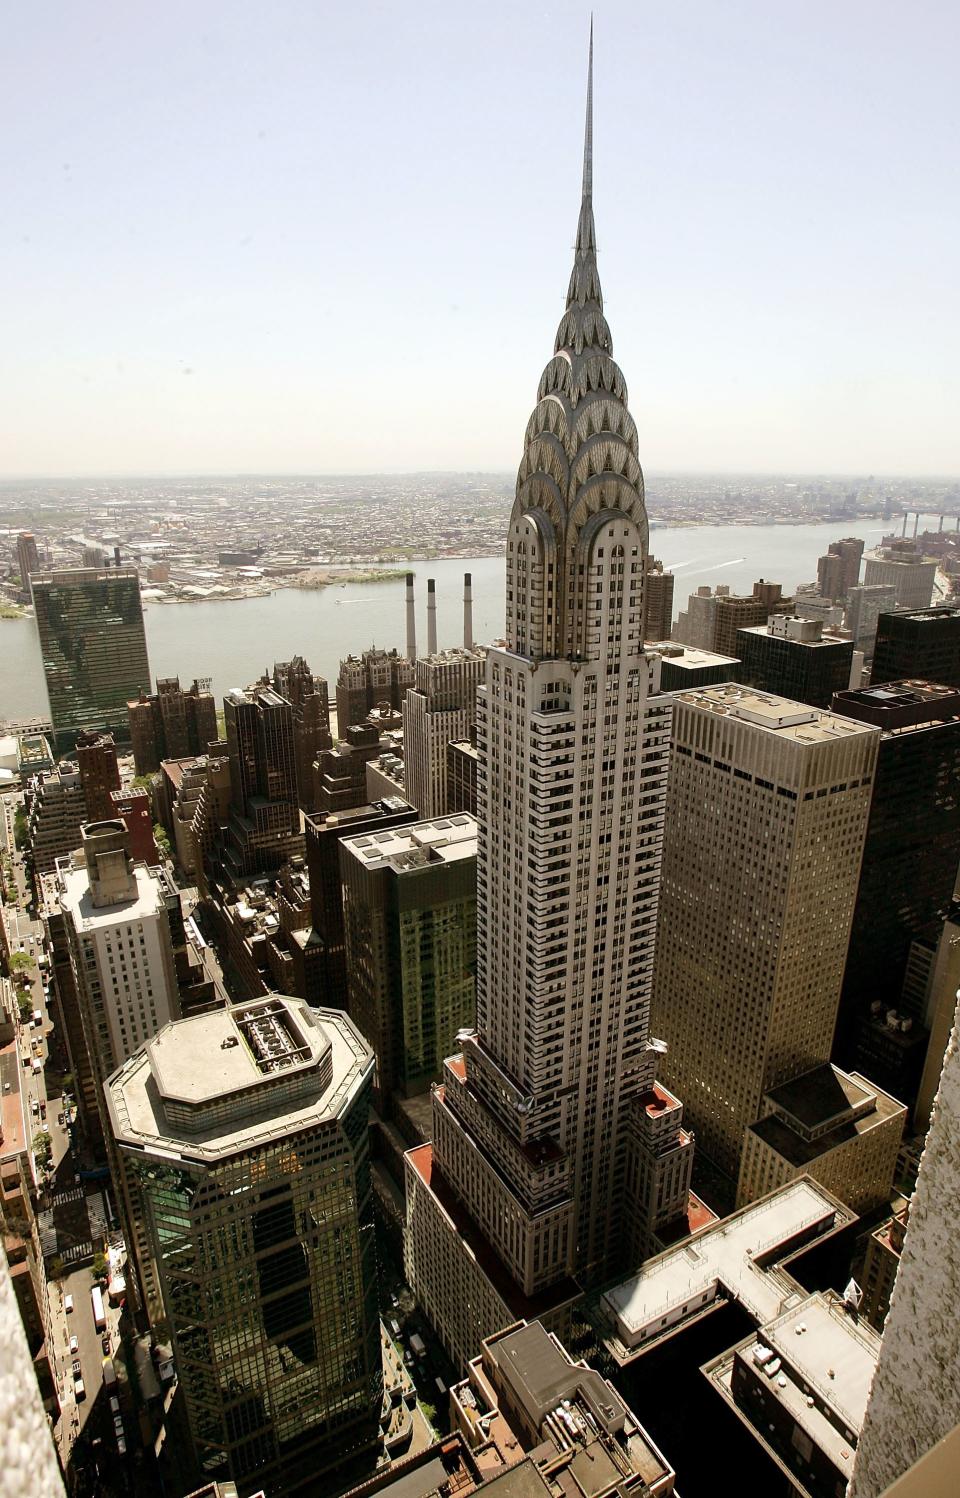 NEW YORK - MAY 27:  The Chrysler Building is seen from the roof of the Met Life building as the press were given a tour to mark the 75th Anniversary of the New York Landmark May 27, 2005 in New York City. The Art Deco building is now owned by Tishman Speyer Properties and was opened on May 27, 1930.  (Photo by Mario Tama/Getty Images)